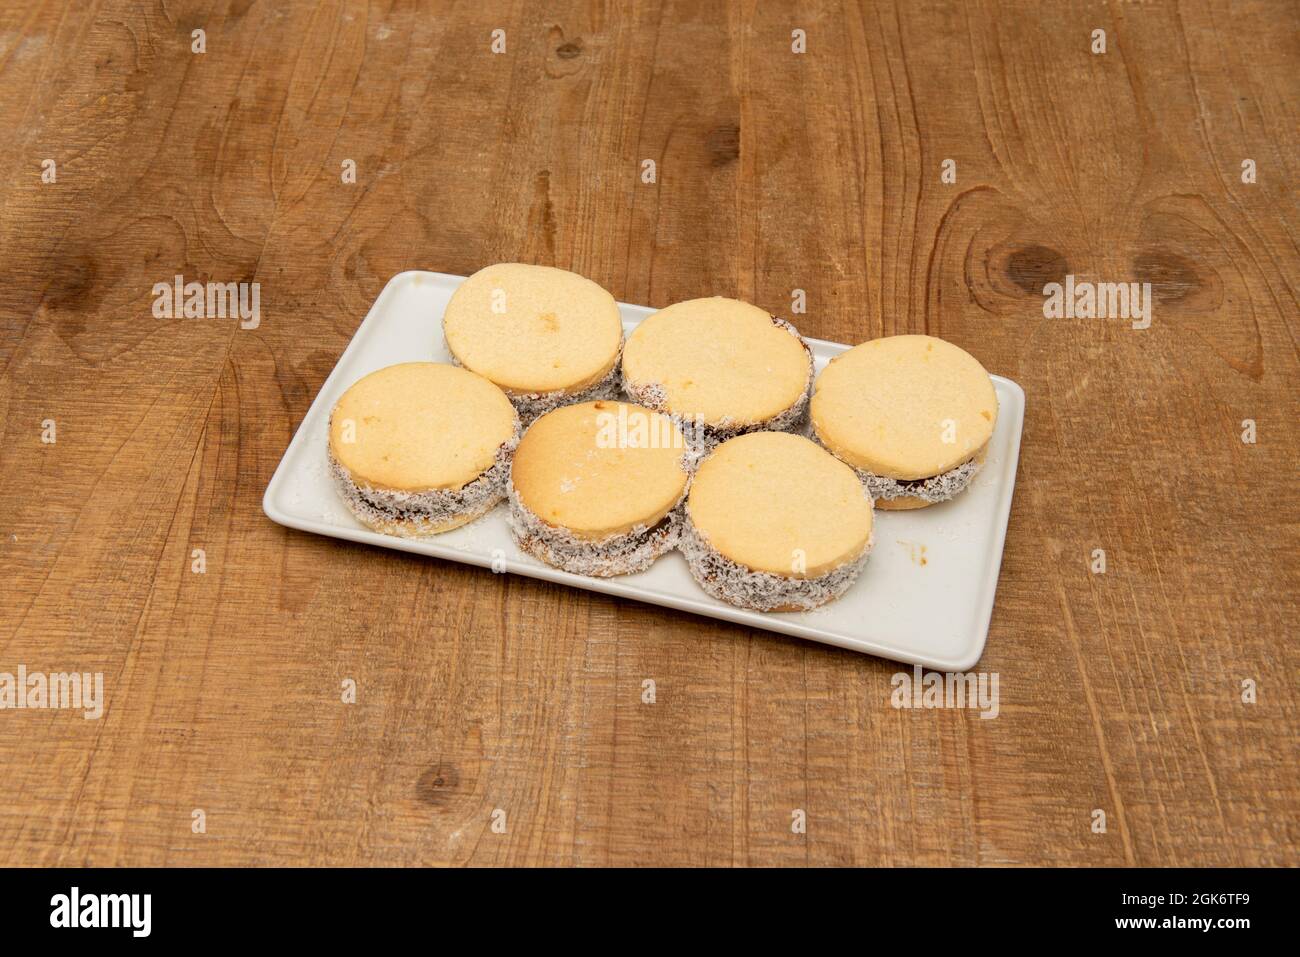 Tray of alfajores, typical tasteless Argentine sweet on wooden table Stock Photo